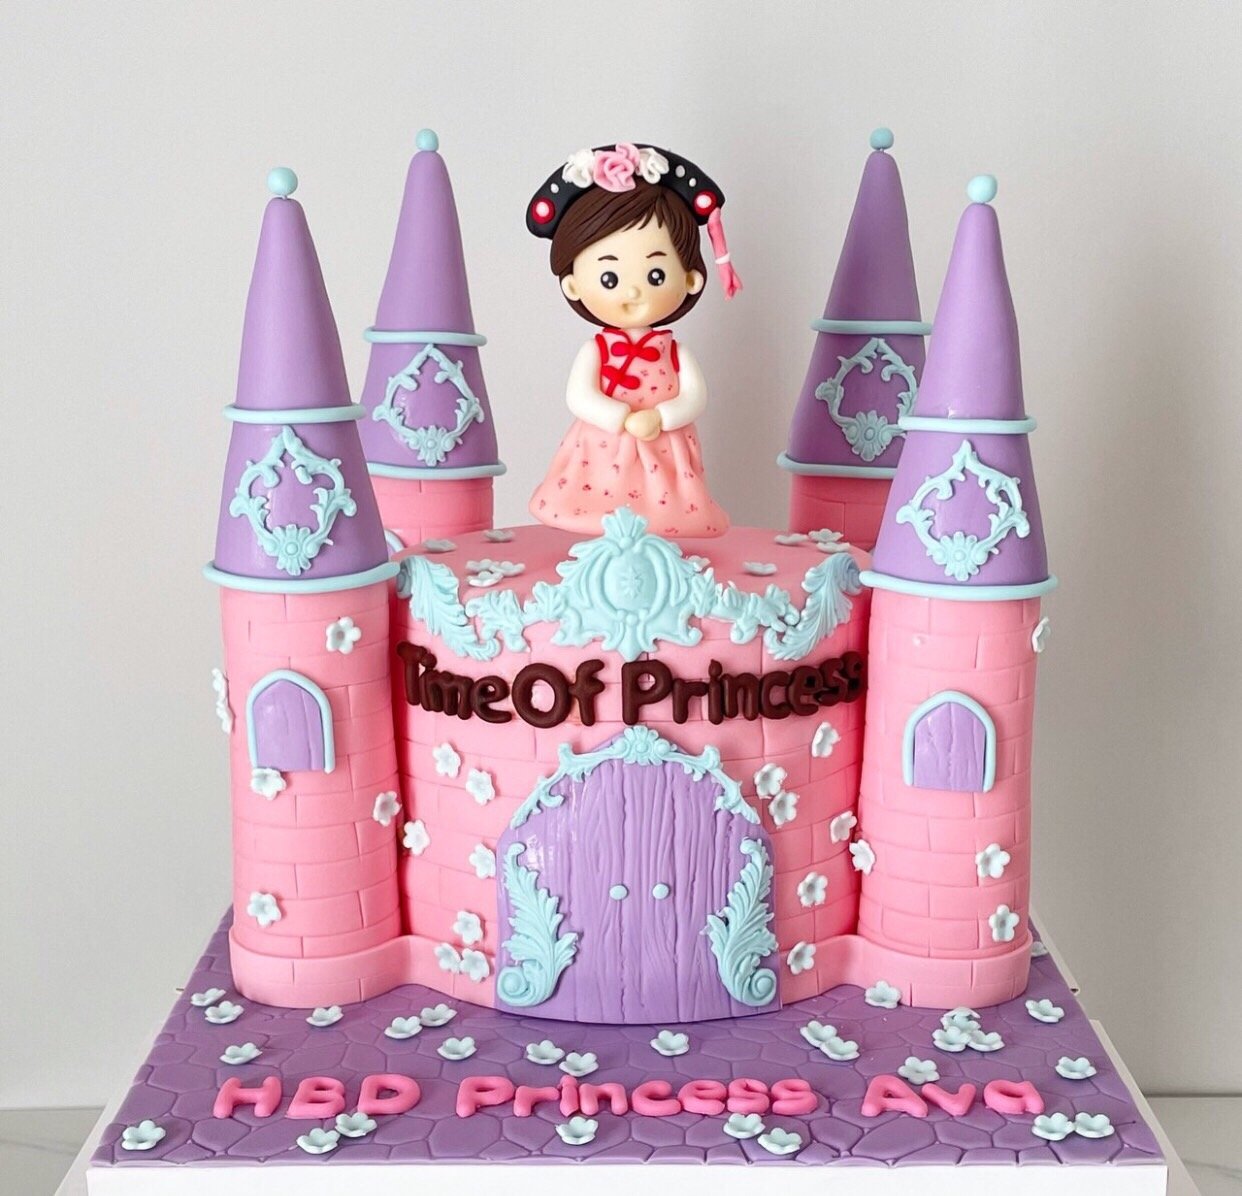 How to make and decorate a Princess Castle Cake with WHiPPED CREAM - YouTube